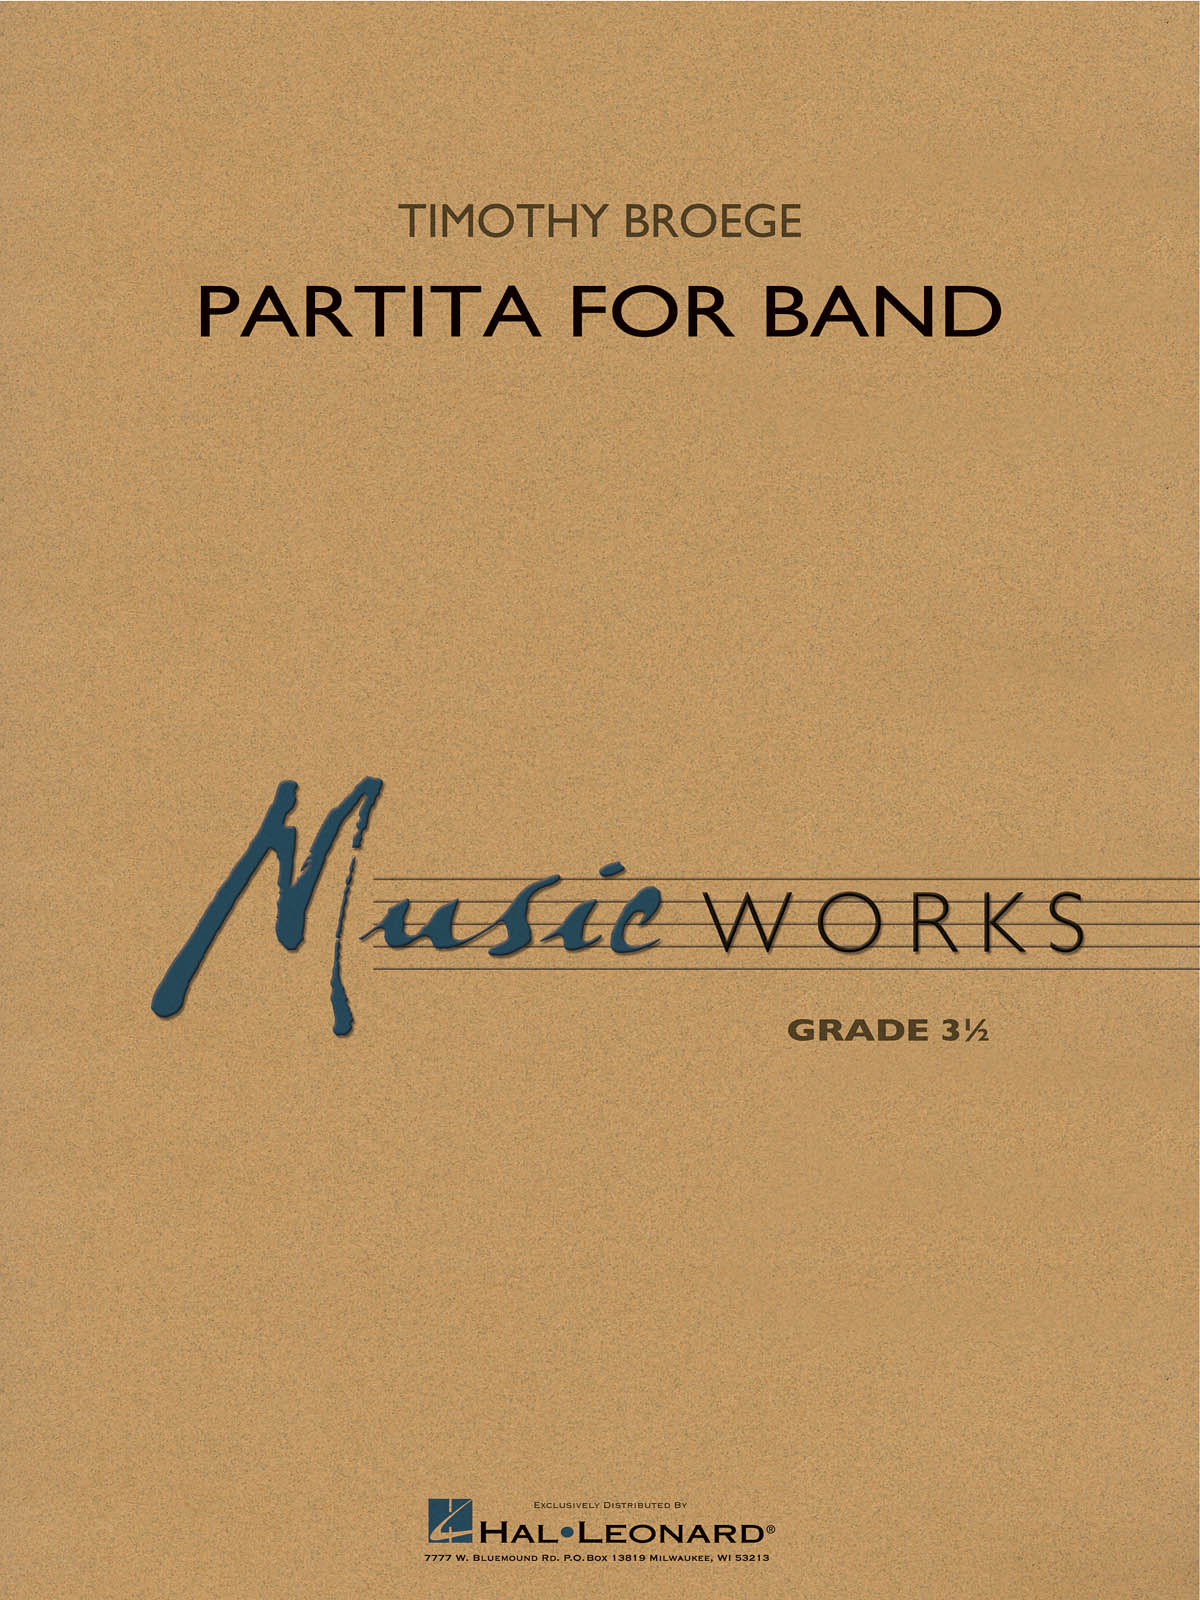 Timothy Broege: Partita for Band: Concert Band: Score